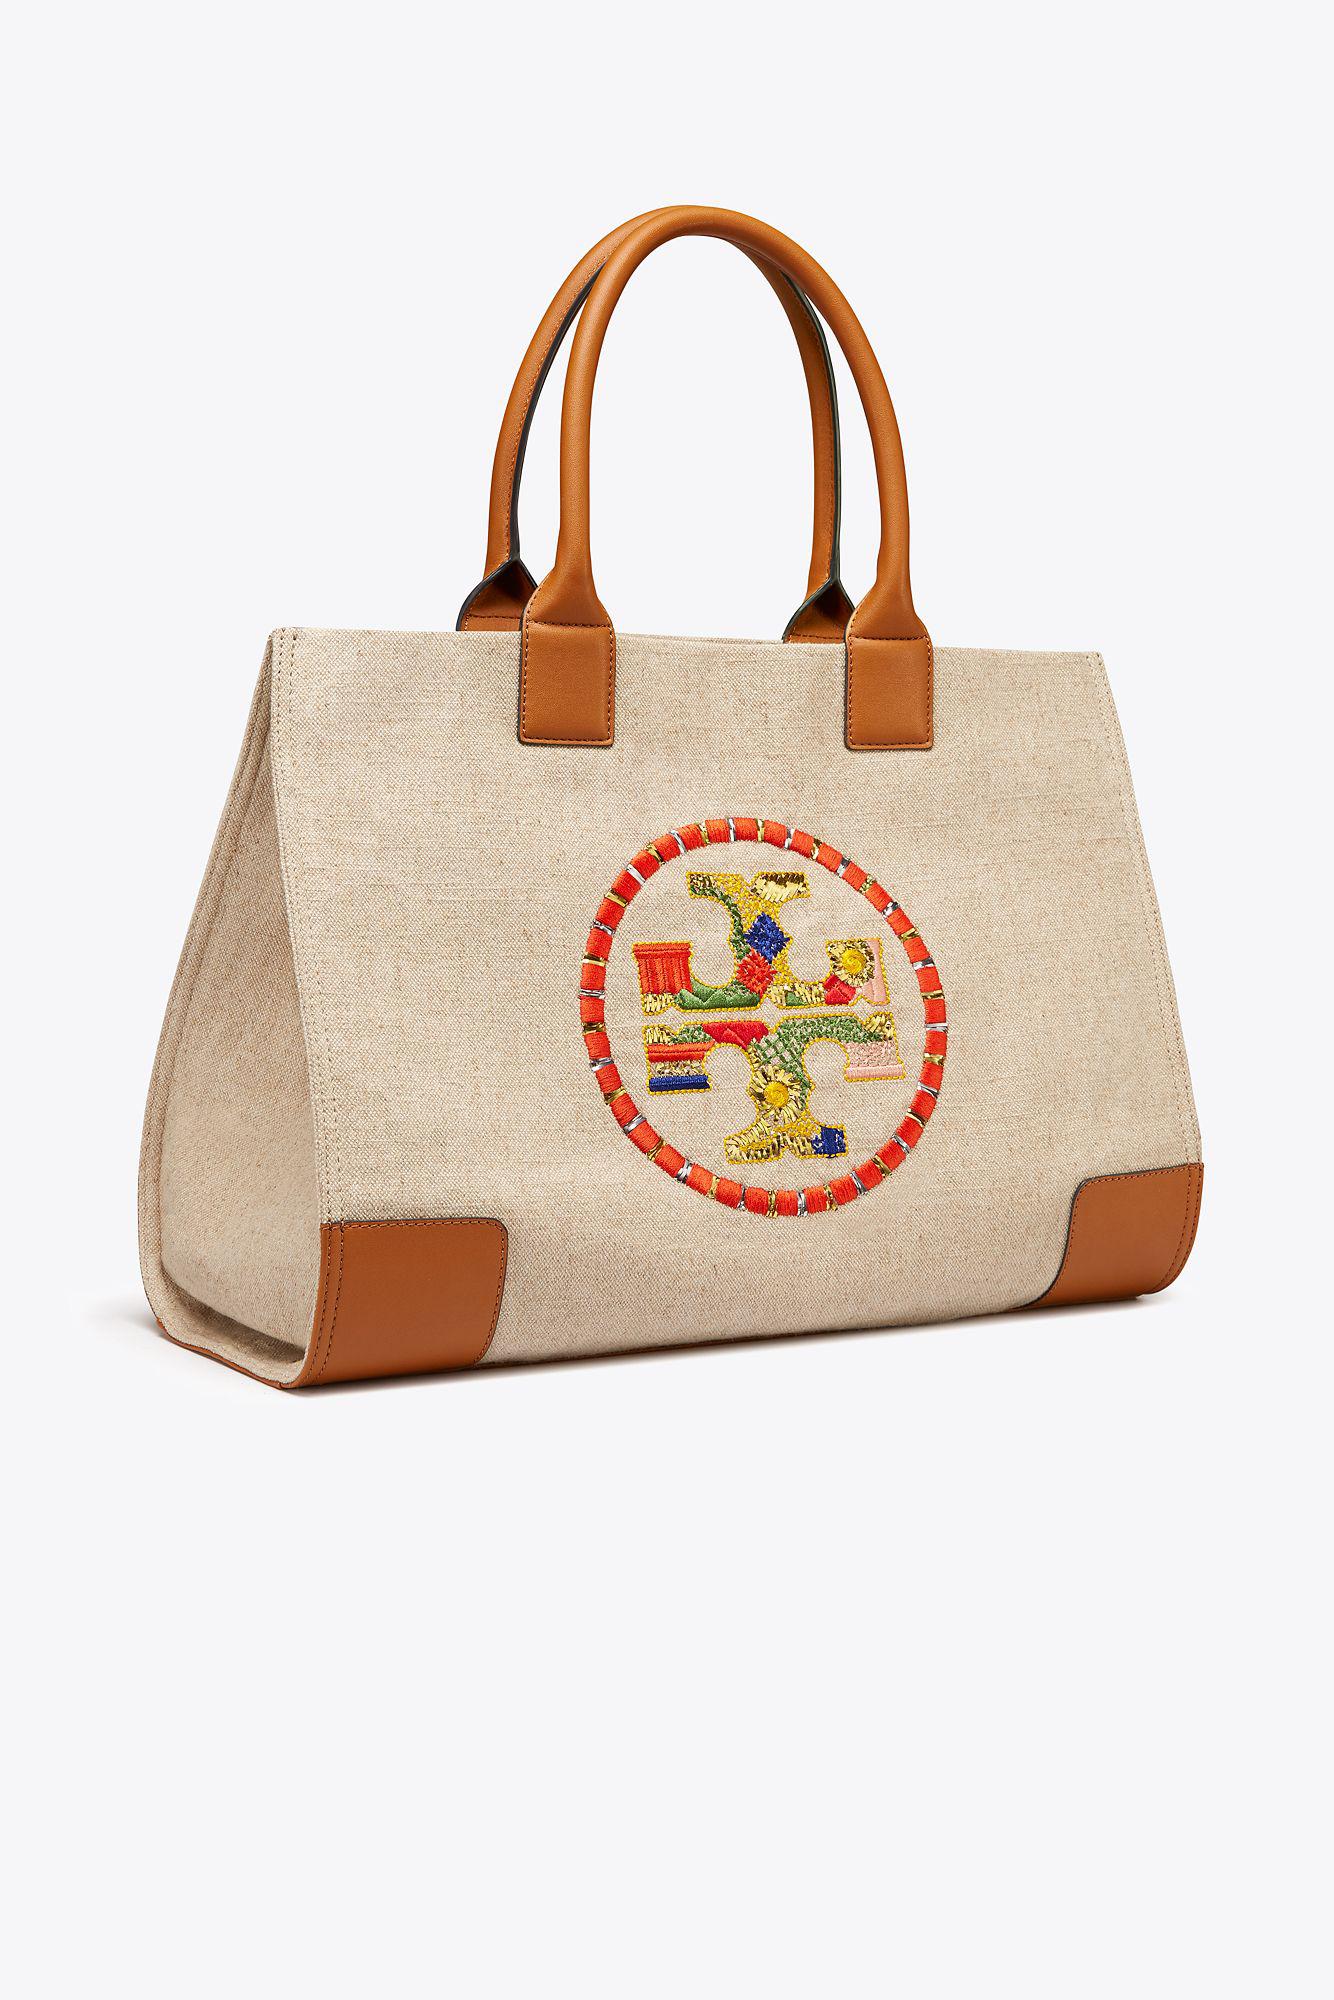 Tory Burch Ella Embroidered Tote in Natural | Lyst